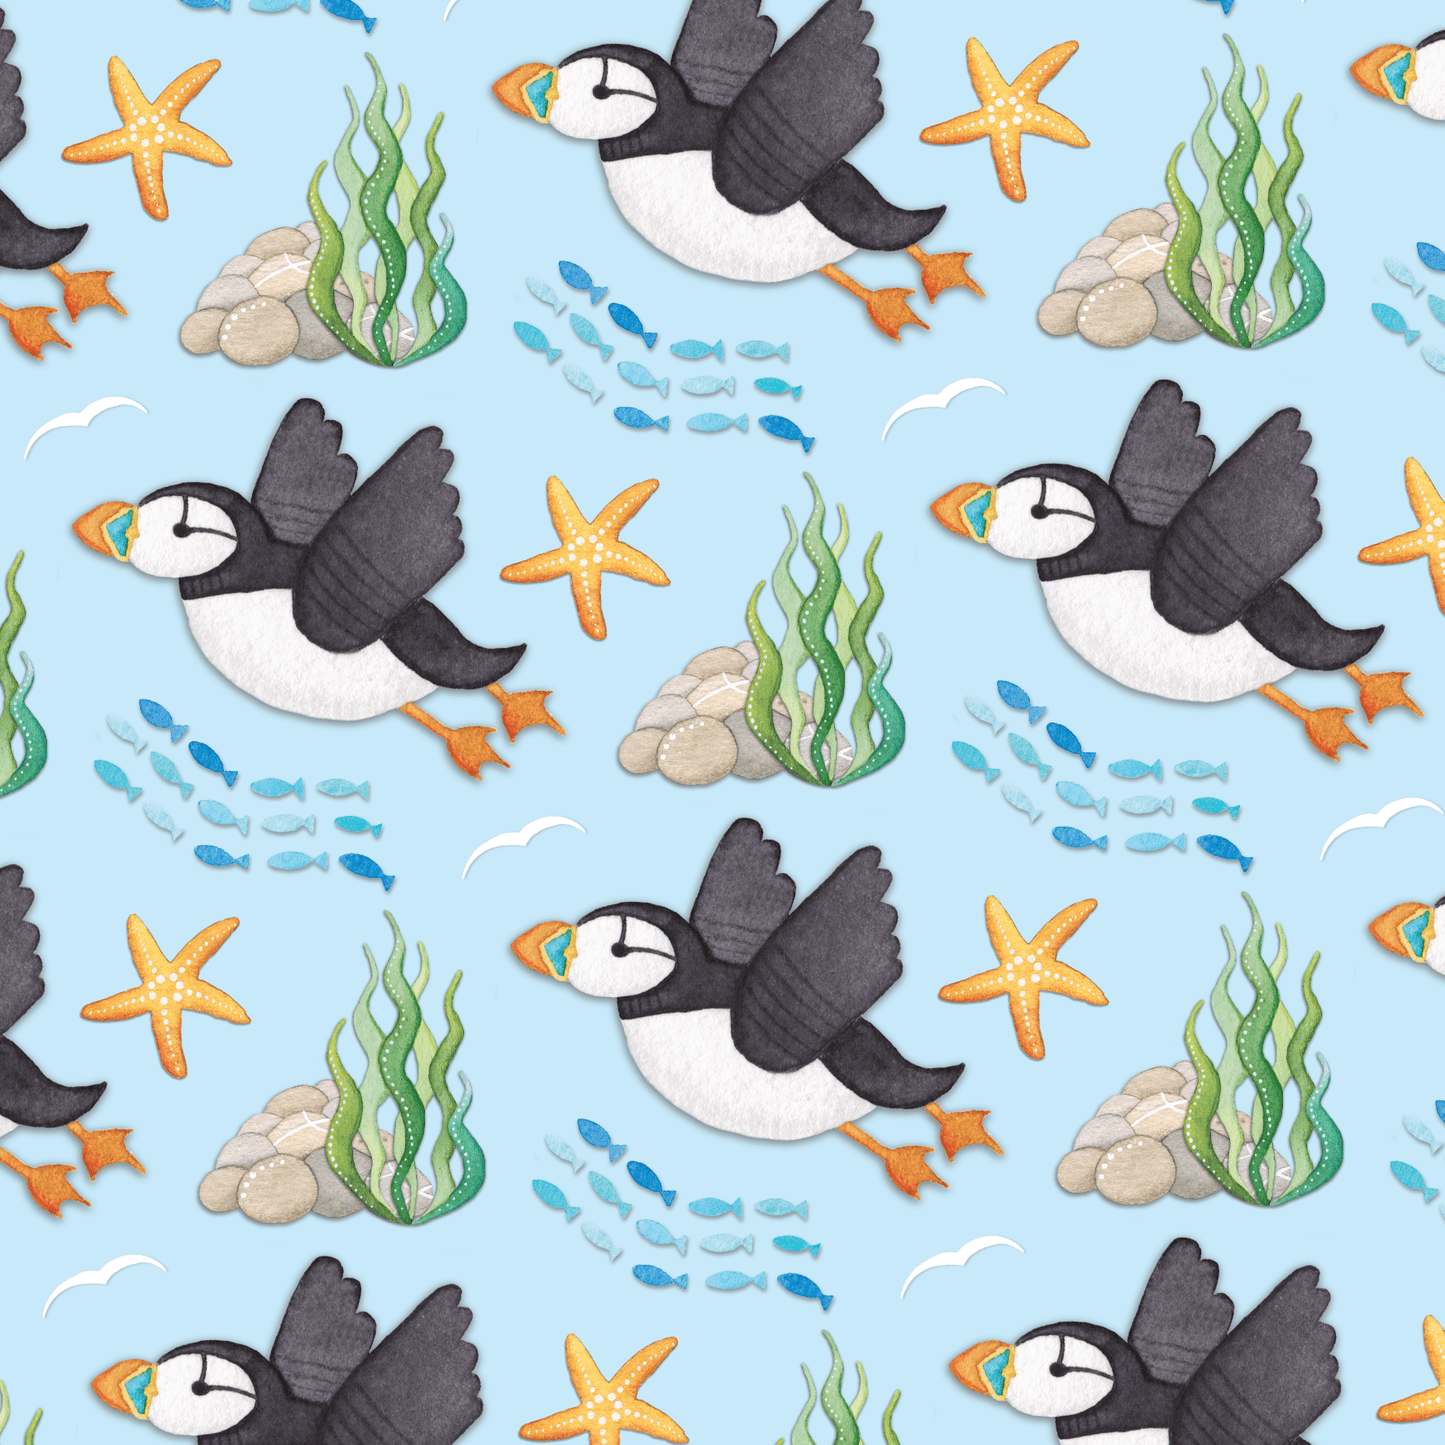 Greetings Card - Flying Puffins Pattern - Seaside Watercolour Painting - East Neuk Beach Crafts